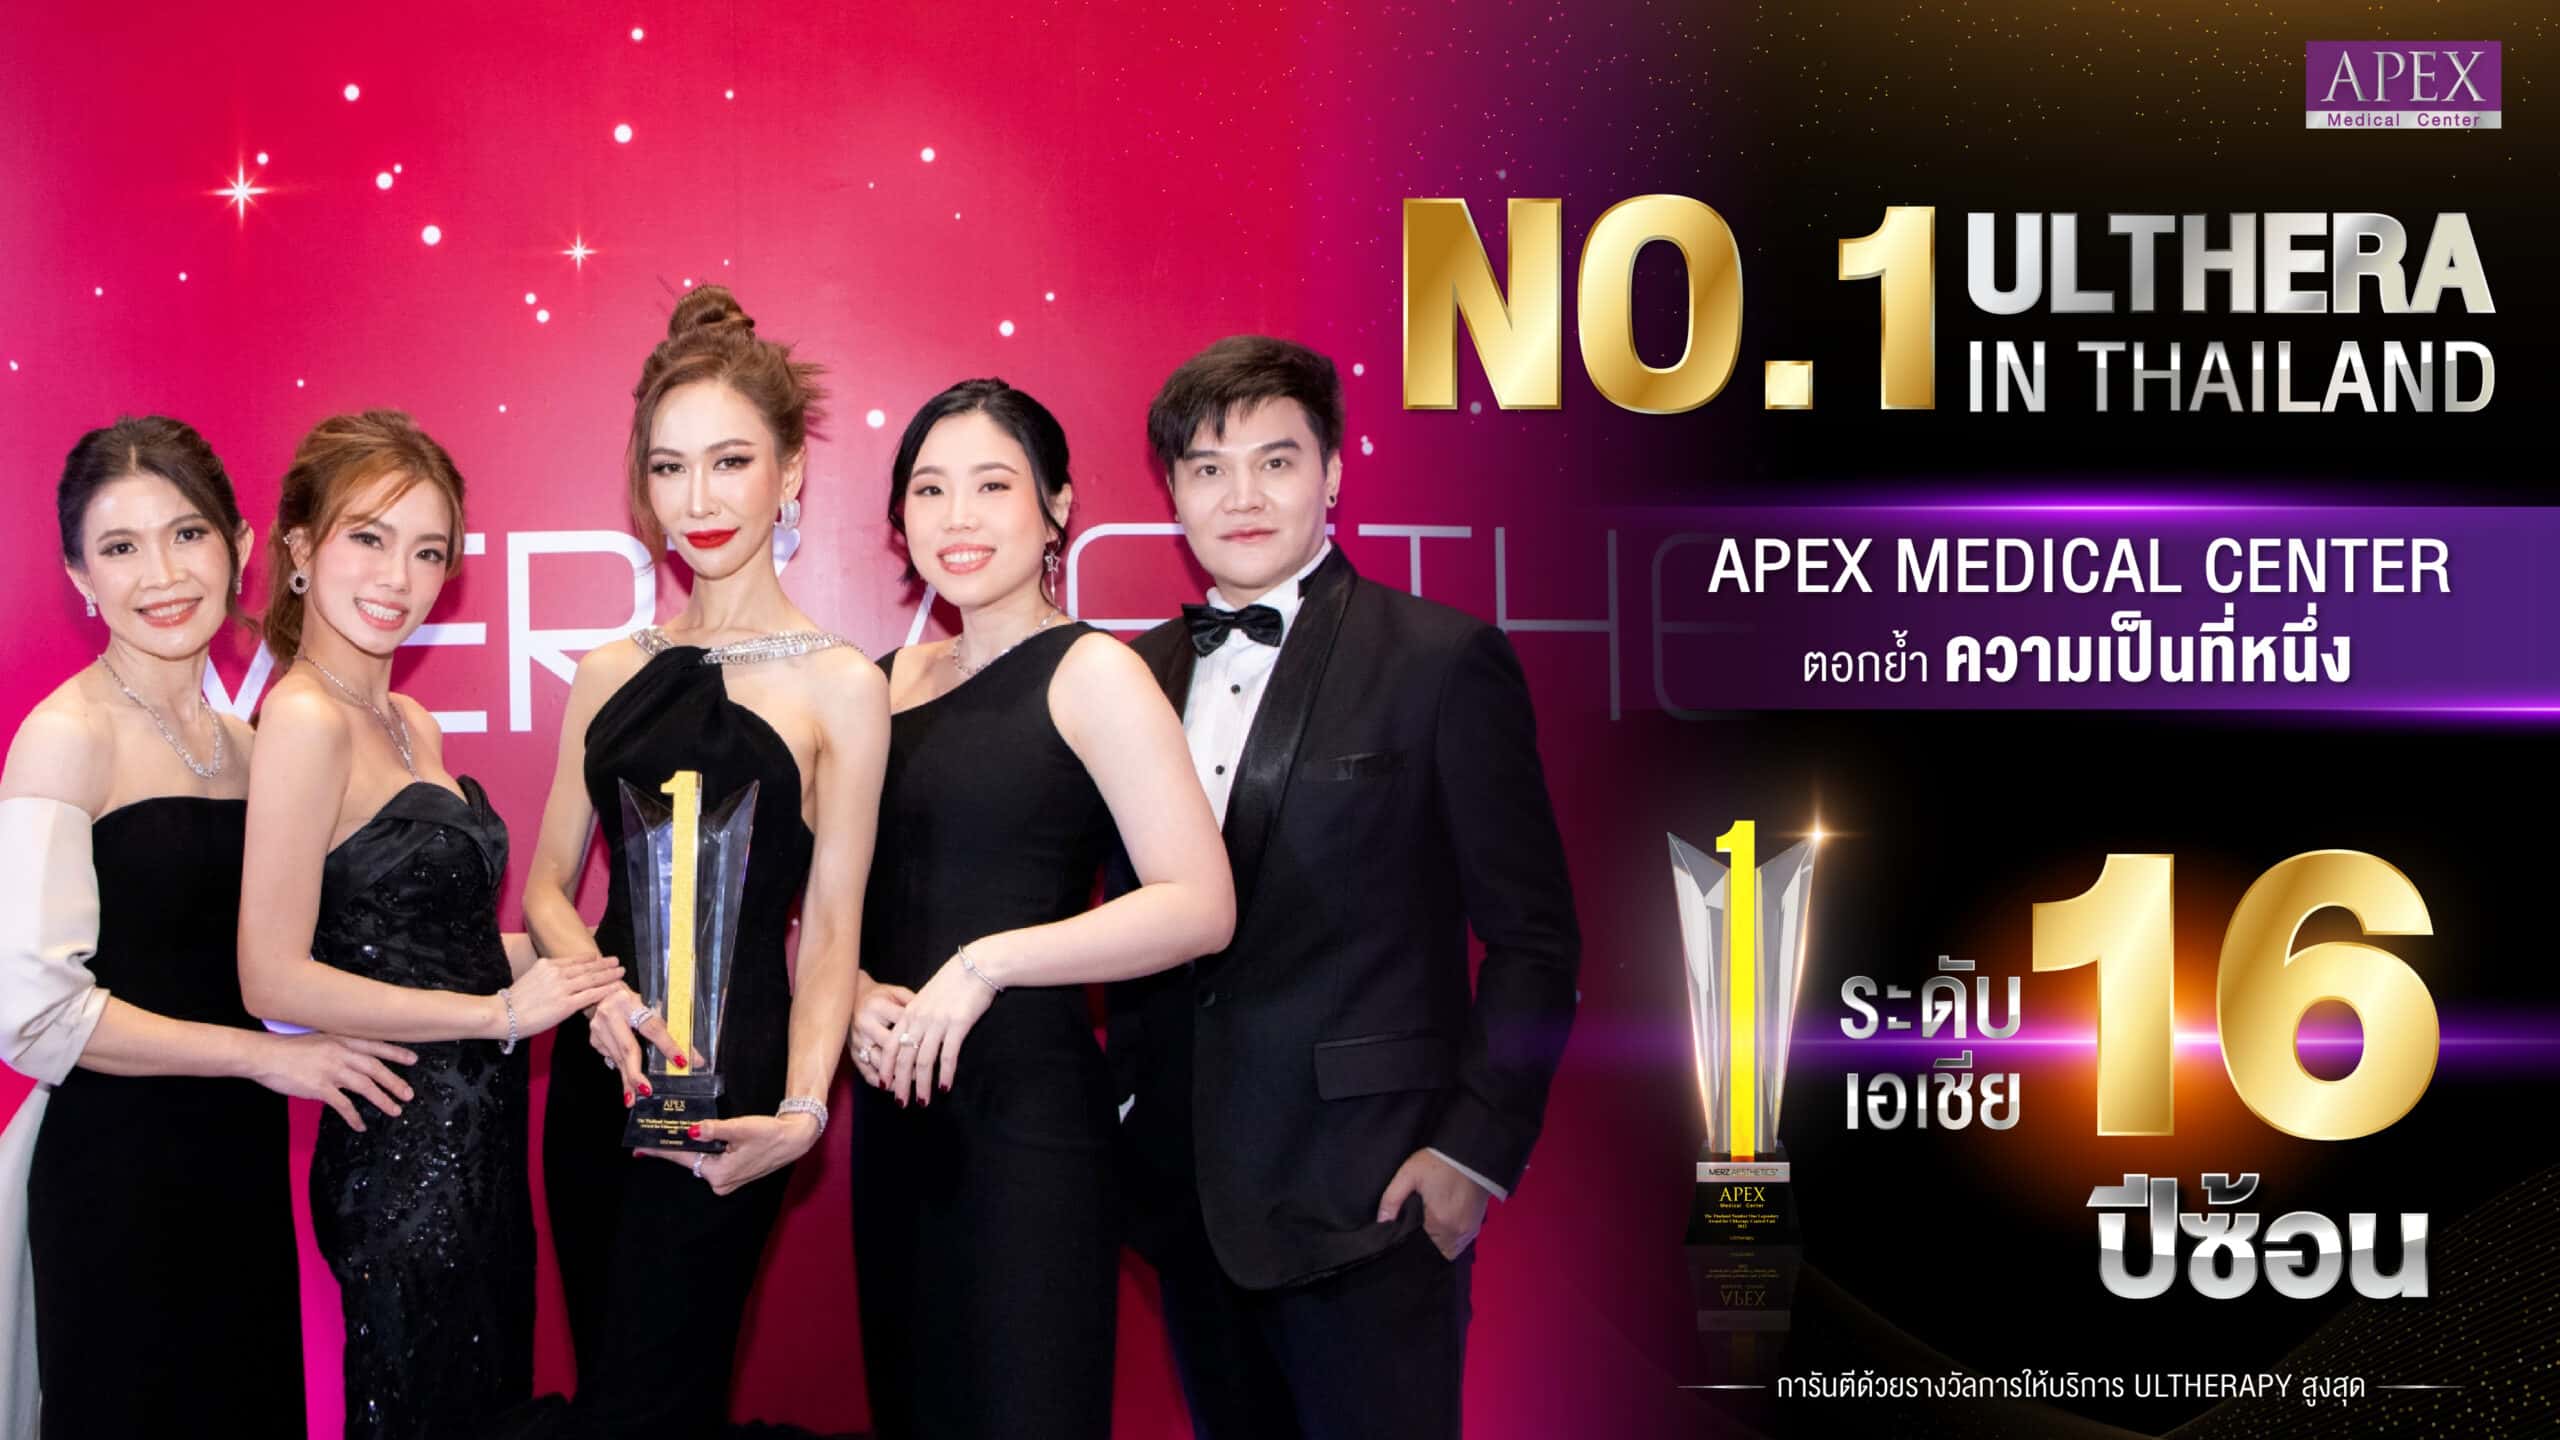 Apex finally wins The Thailand Number One Legendary Award for Ultherapy Control Unit No. 1 service provider in Thailand